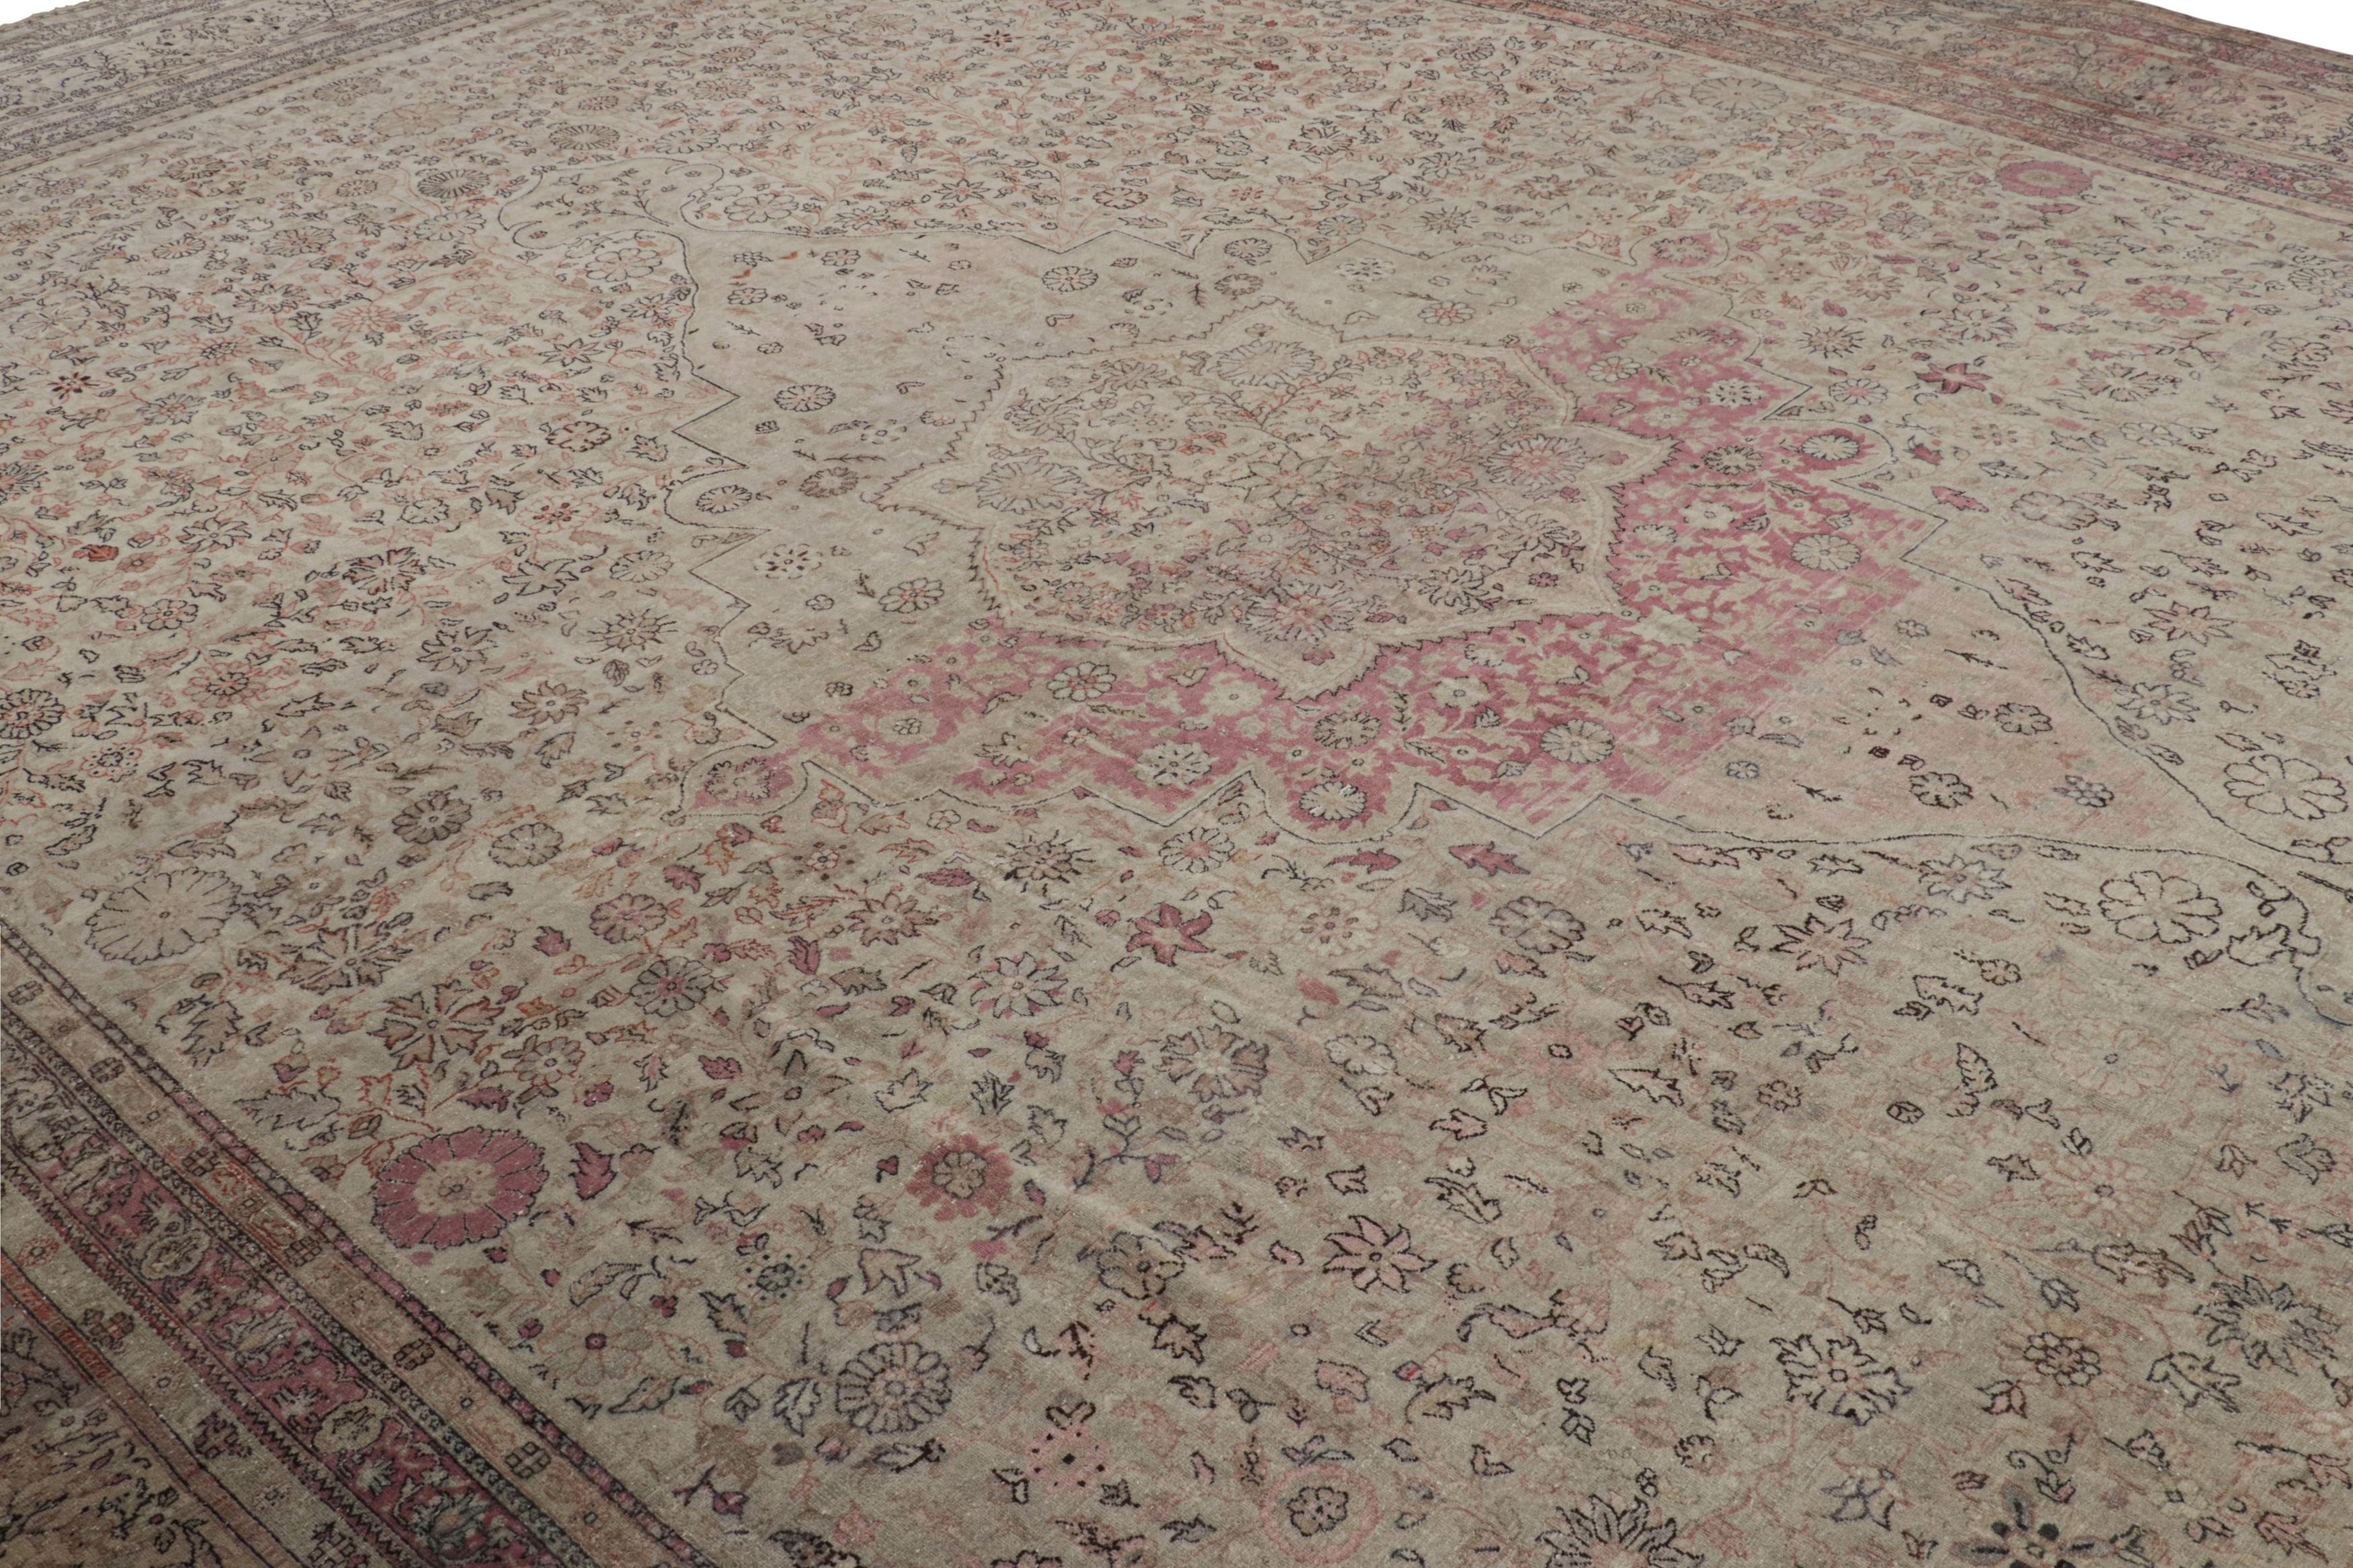 This 13x20 antique Sivas rug is an extremely rare oversized rug of its period—made with hand-knotted wool in Turkey circa 1920-1930. 

On the Design:

Beige-brown tones underscore an elaborate, dense all over floral pattern surrounding a large